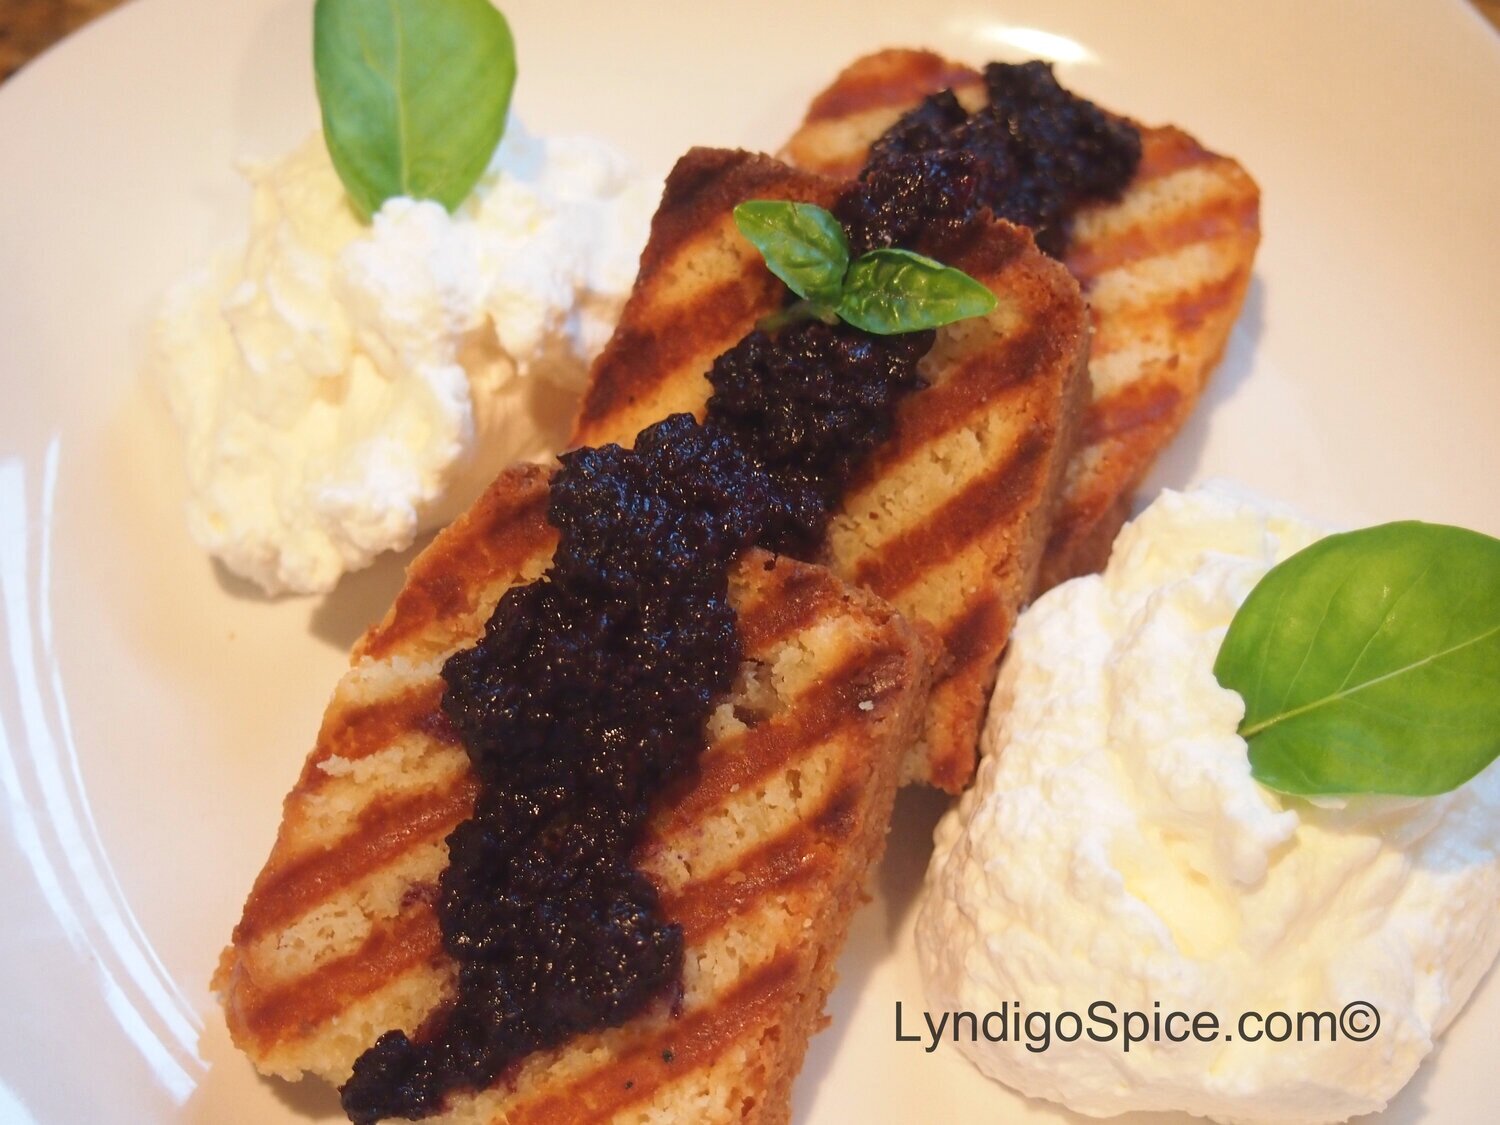 Grilled Lemon Pound Cake with Gingery Blueberry Fruit Spread